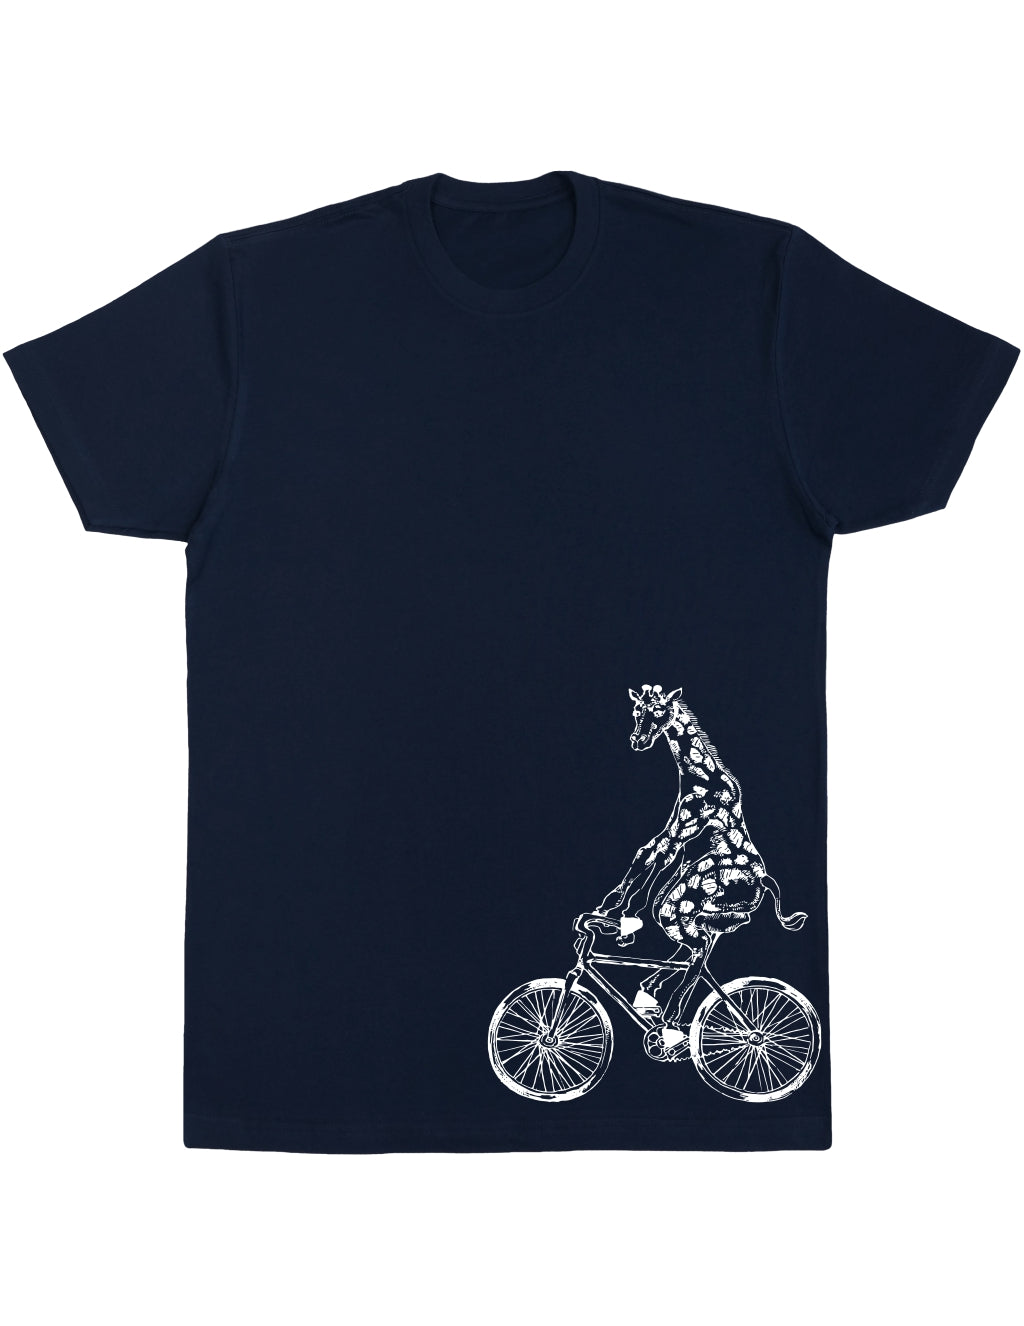 t-shirt-of-giraffe-on-a-bicycle-mens-cotton-navy-side-print